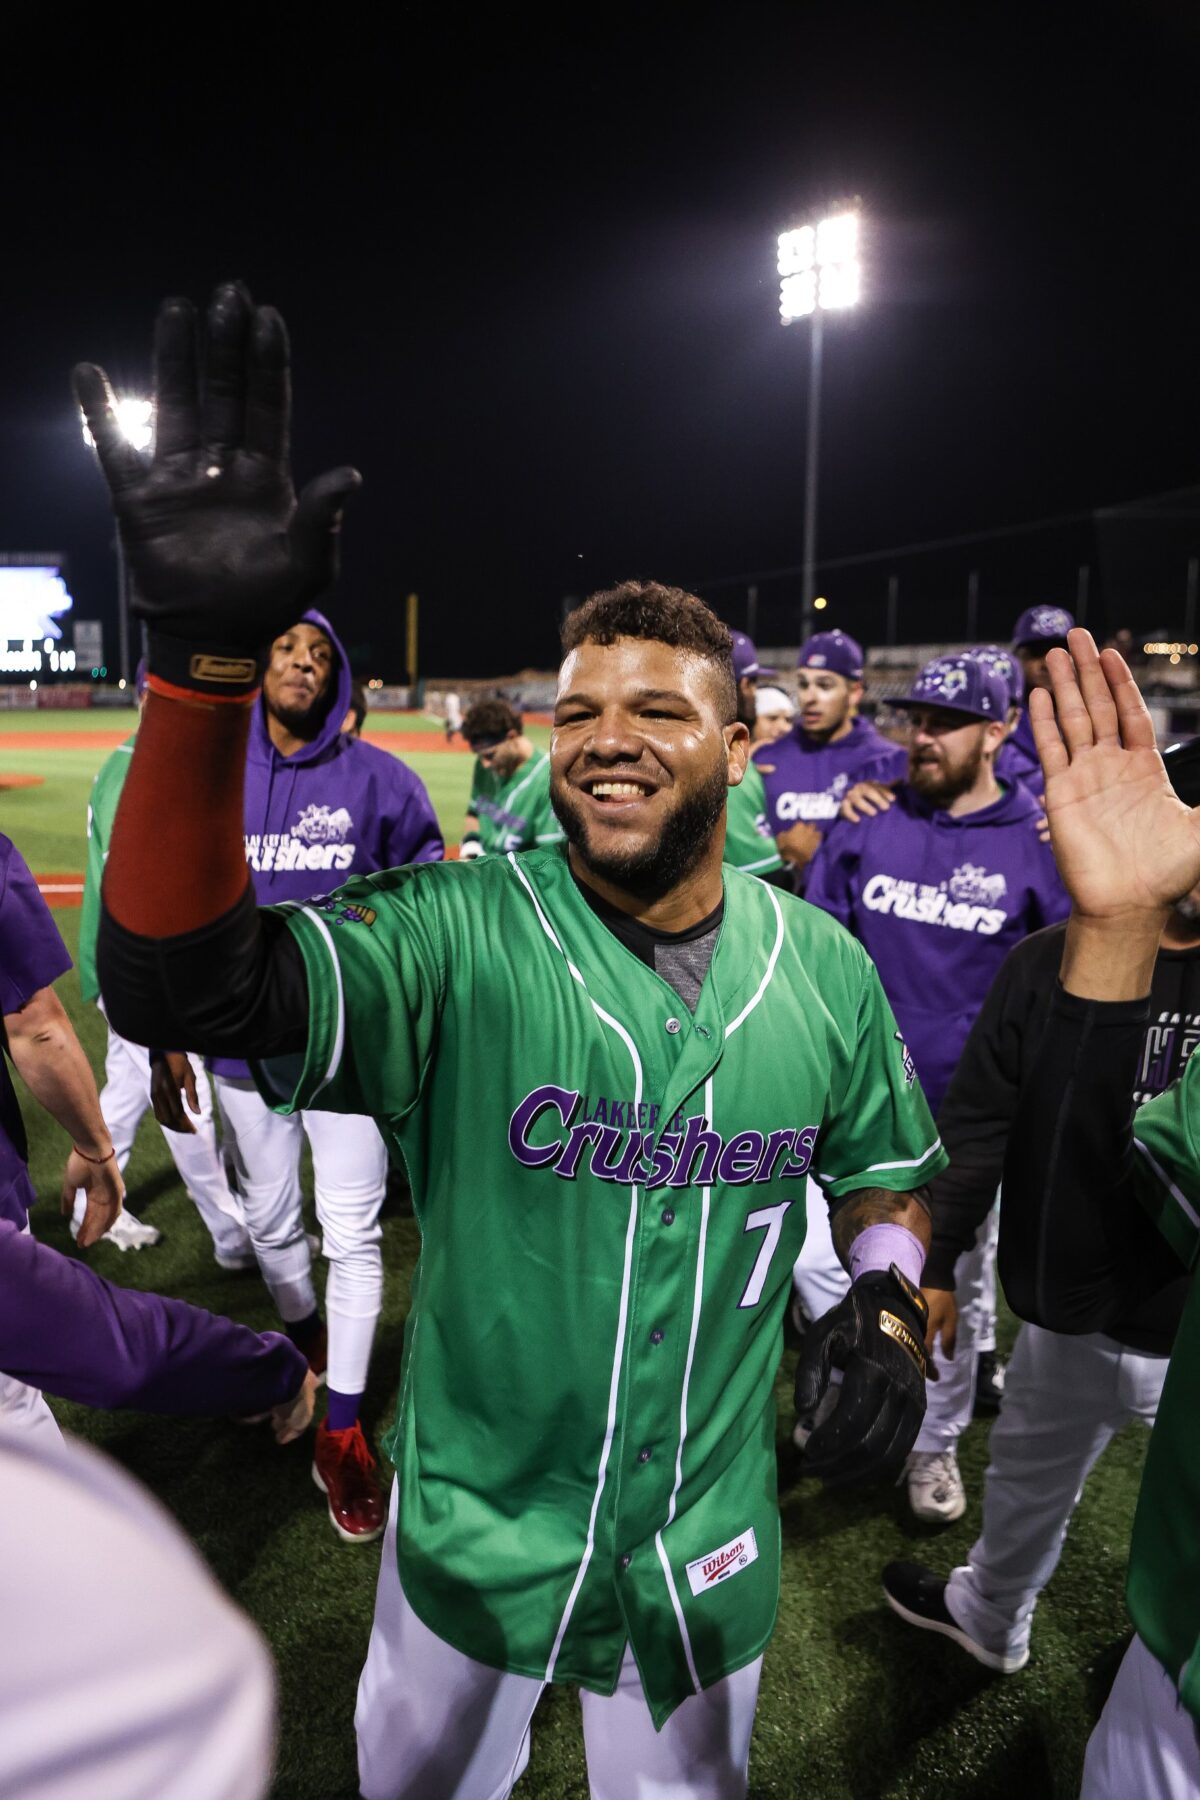 Gone[zo] – Alfredo Gonzalez Launches Walk-Off Homer to Take Game One Against Quebec